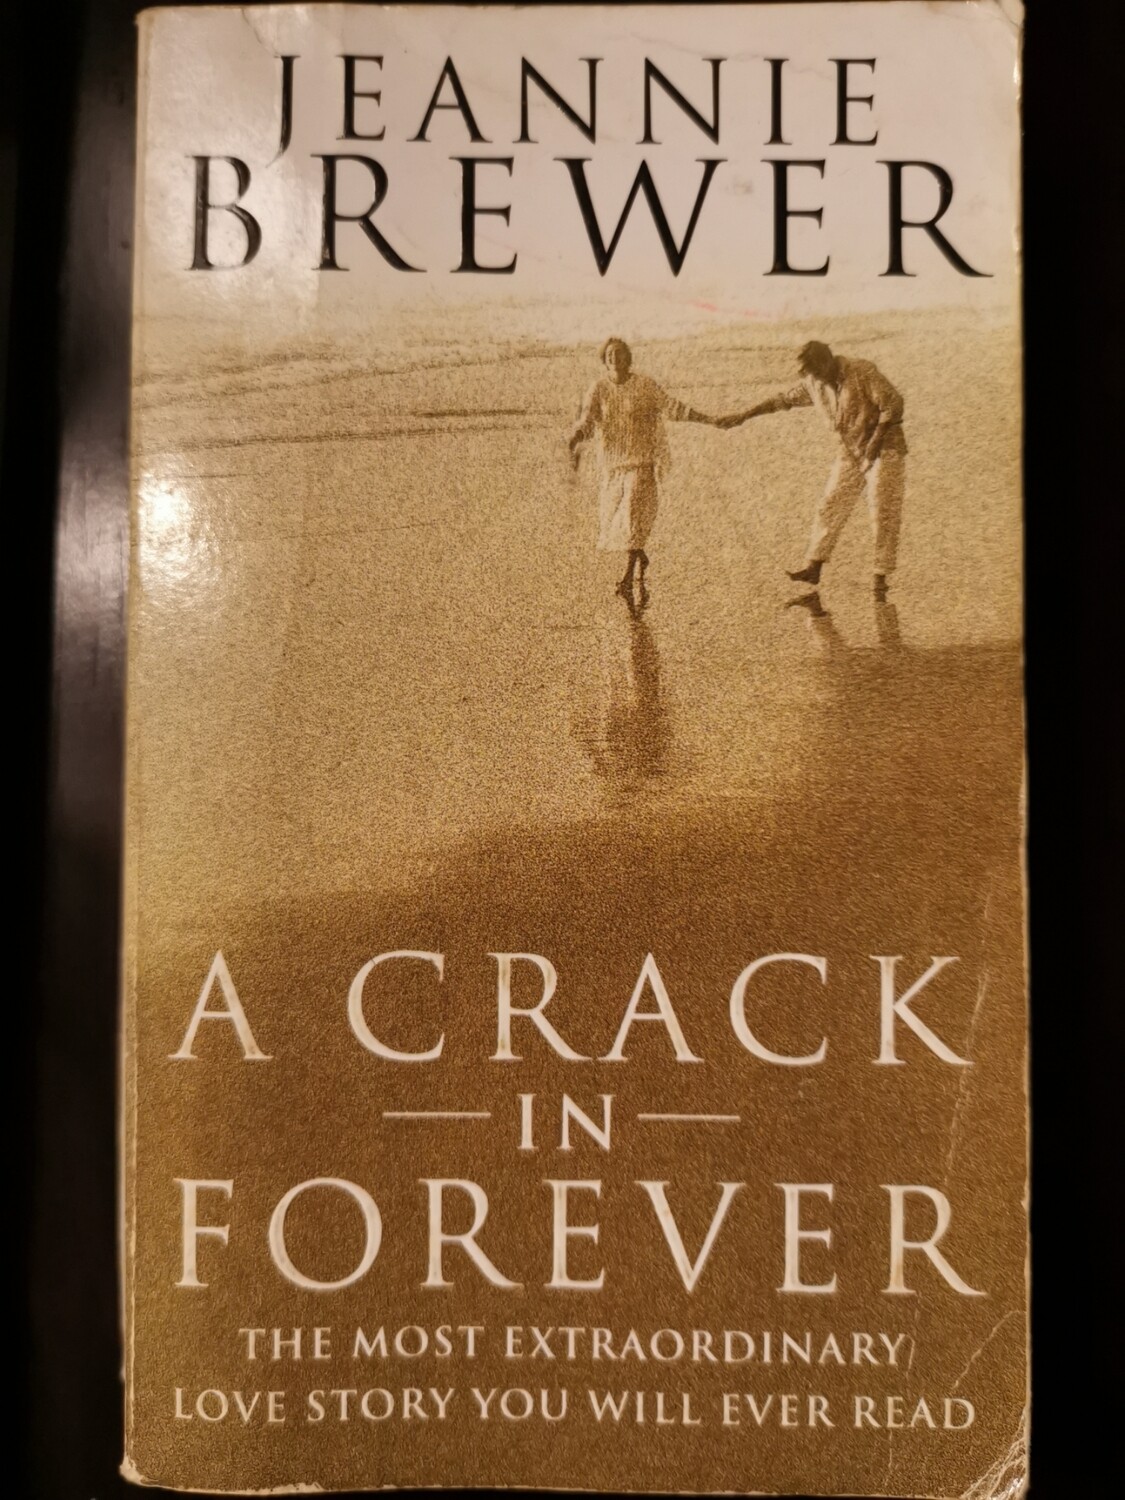 A crack in forever, Jeannie Brewer